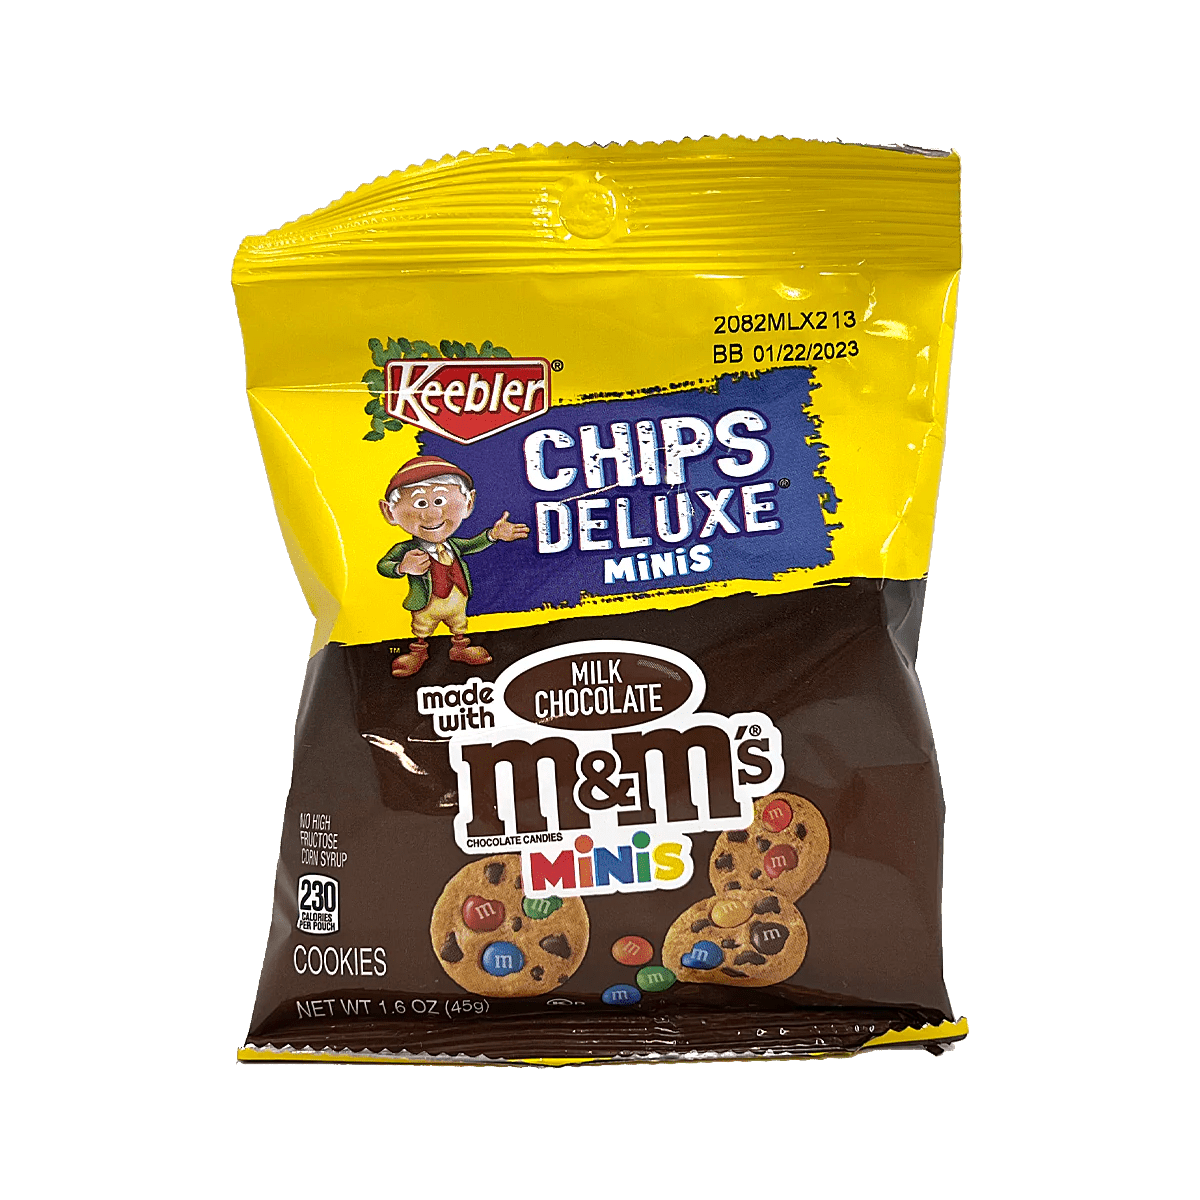 Keebler chips Deluxe M&M Minis Cookies product foto